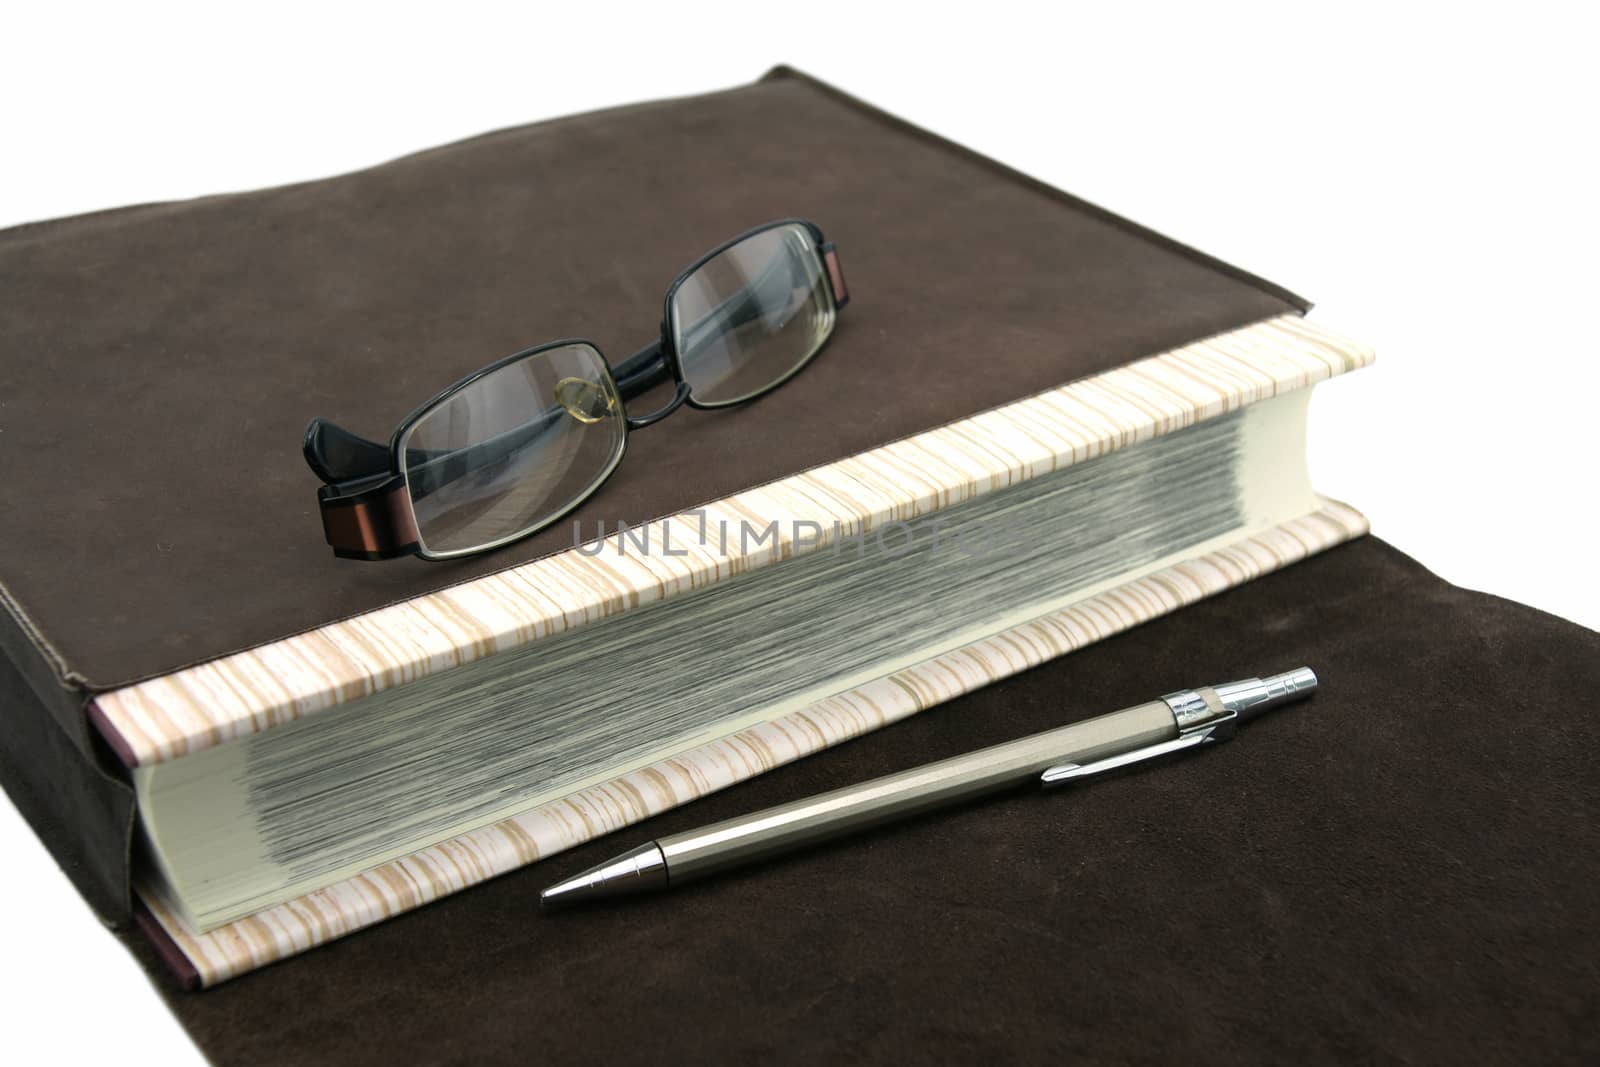 Old text book or bible with pen and eyeglasses and leather bag by mranucha